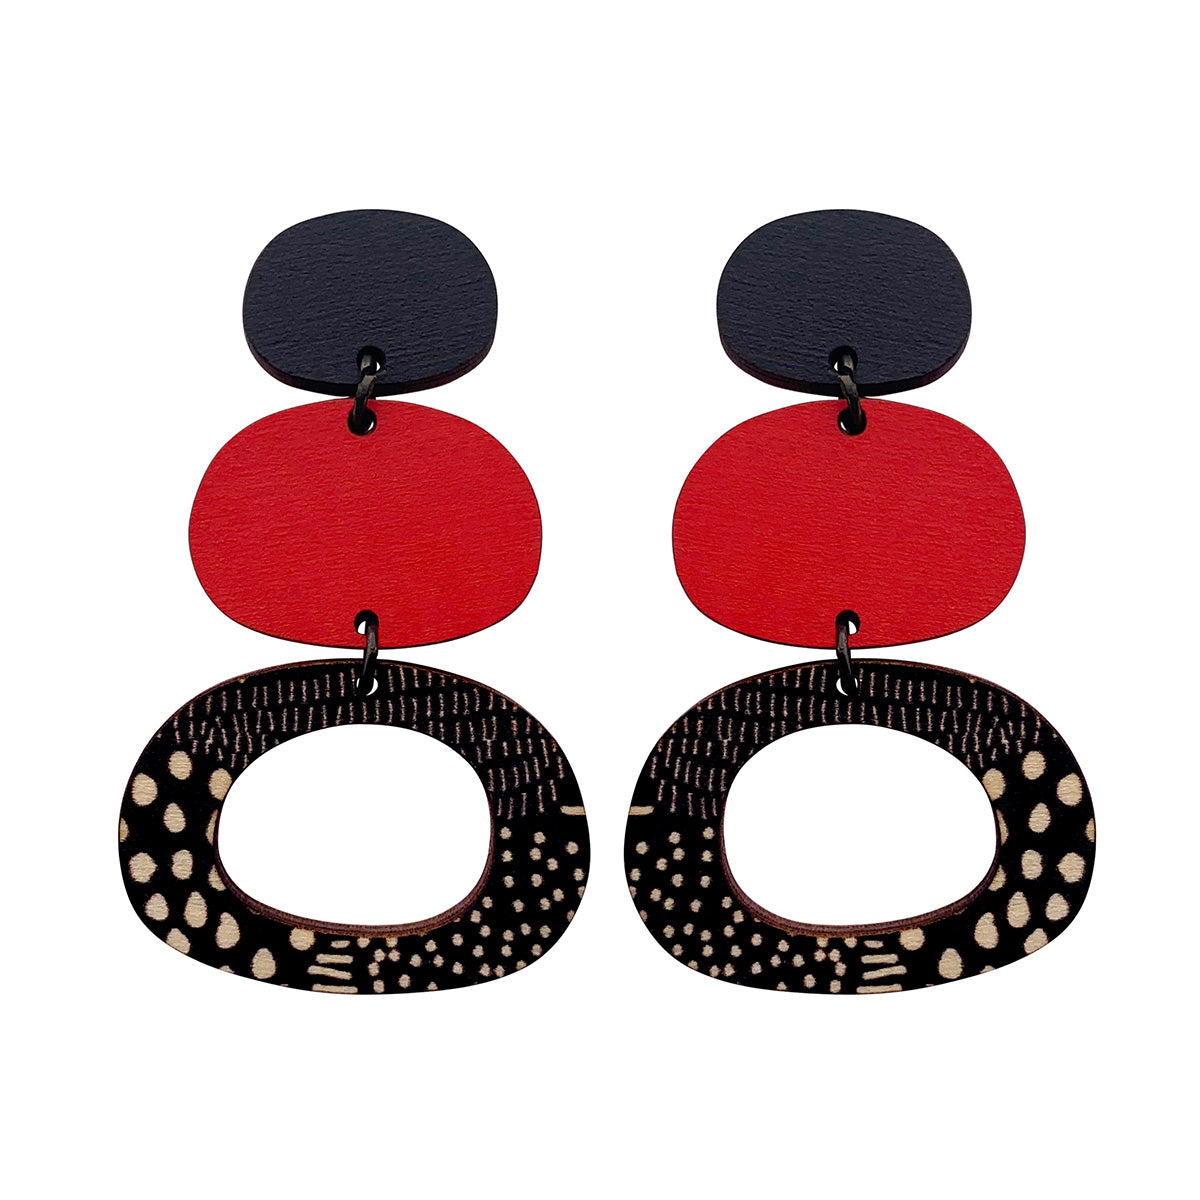 Large 3 tier Earrings in red and Night Garden pattern